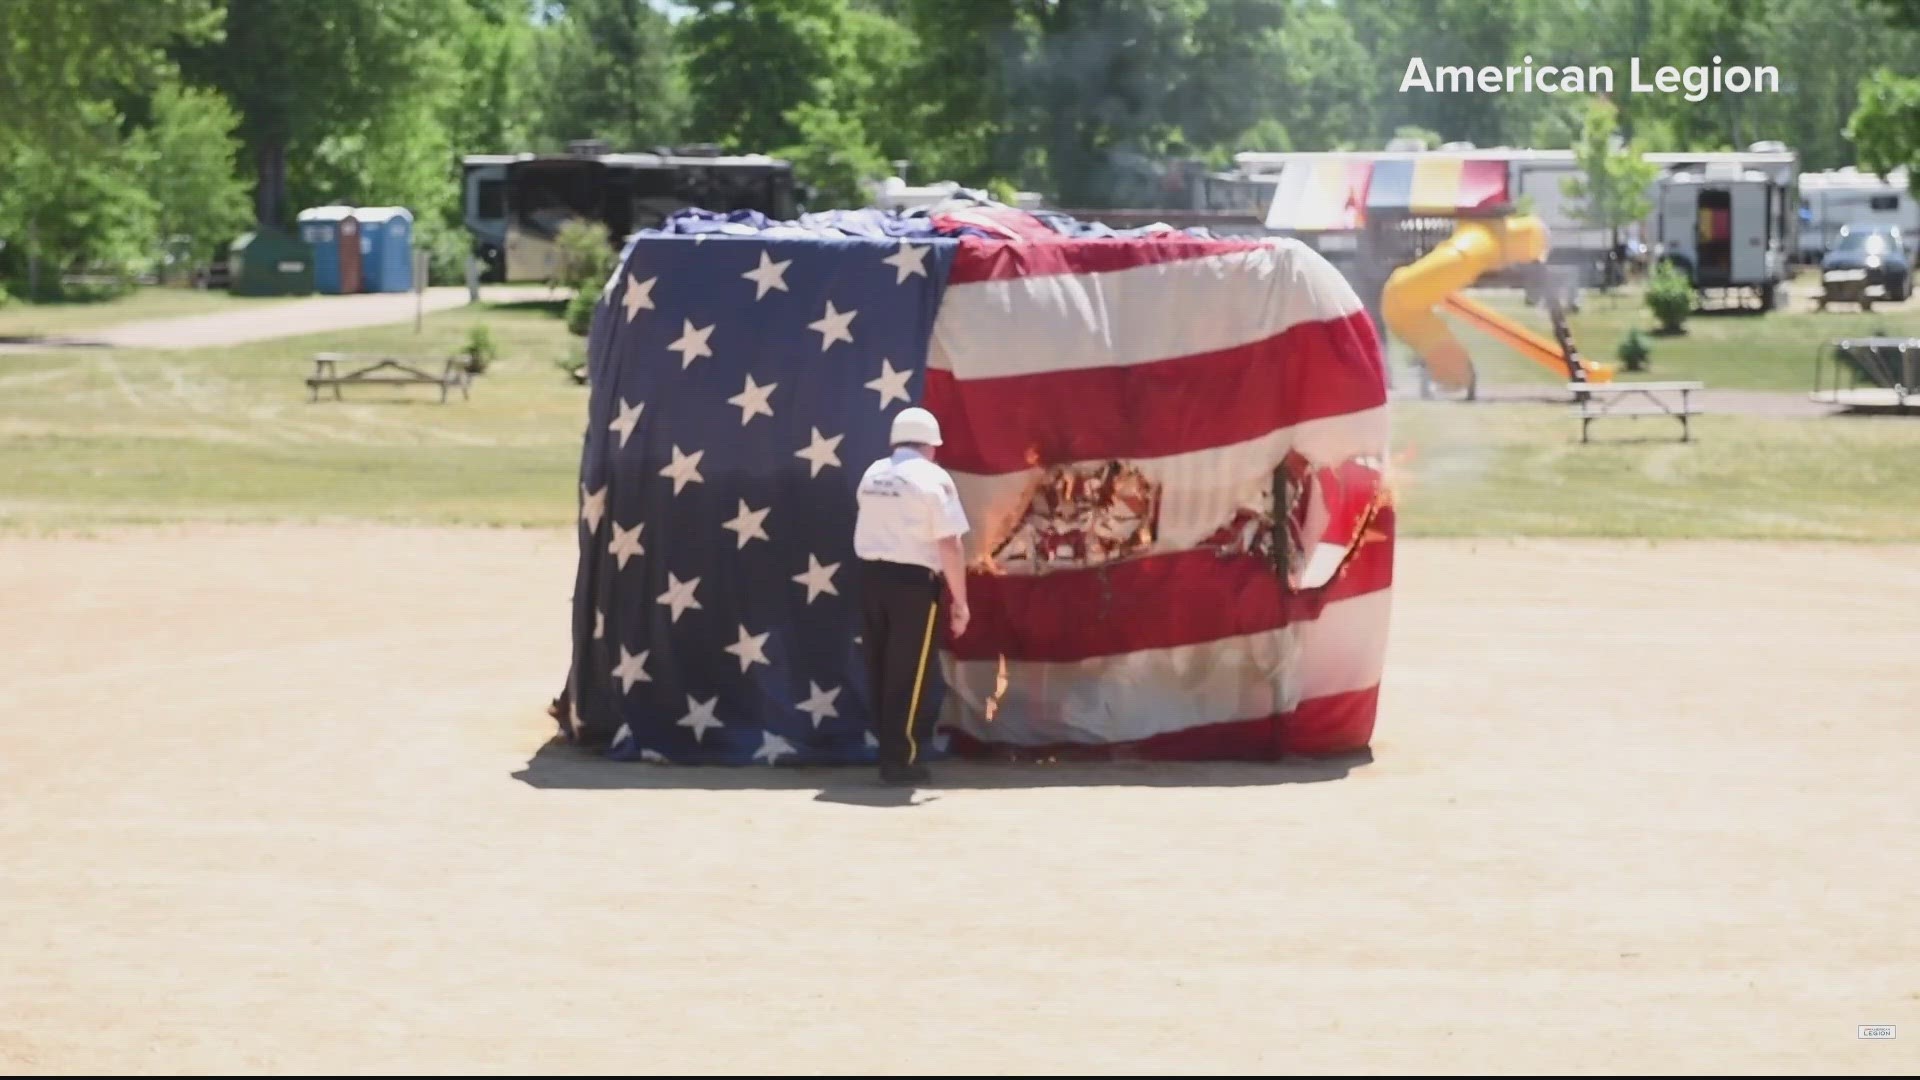 This Memorial Day weekend, you will probably see lots of American flags majestically streaming in the wind. But once a flag is too discolored or tattered to be flown